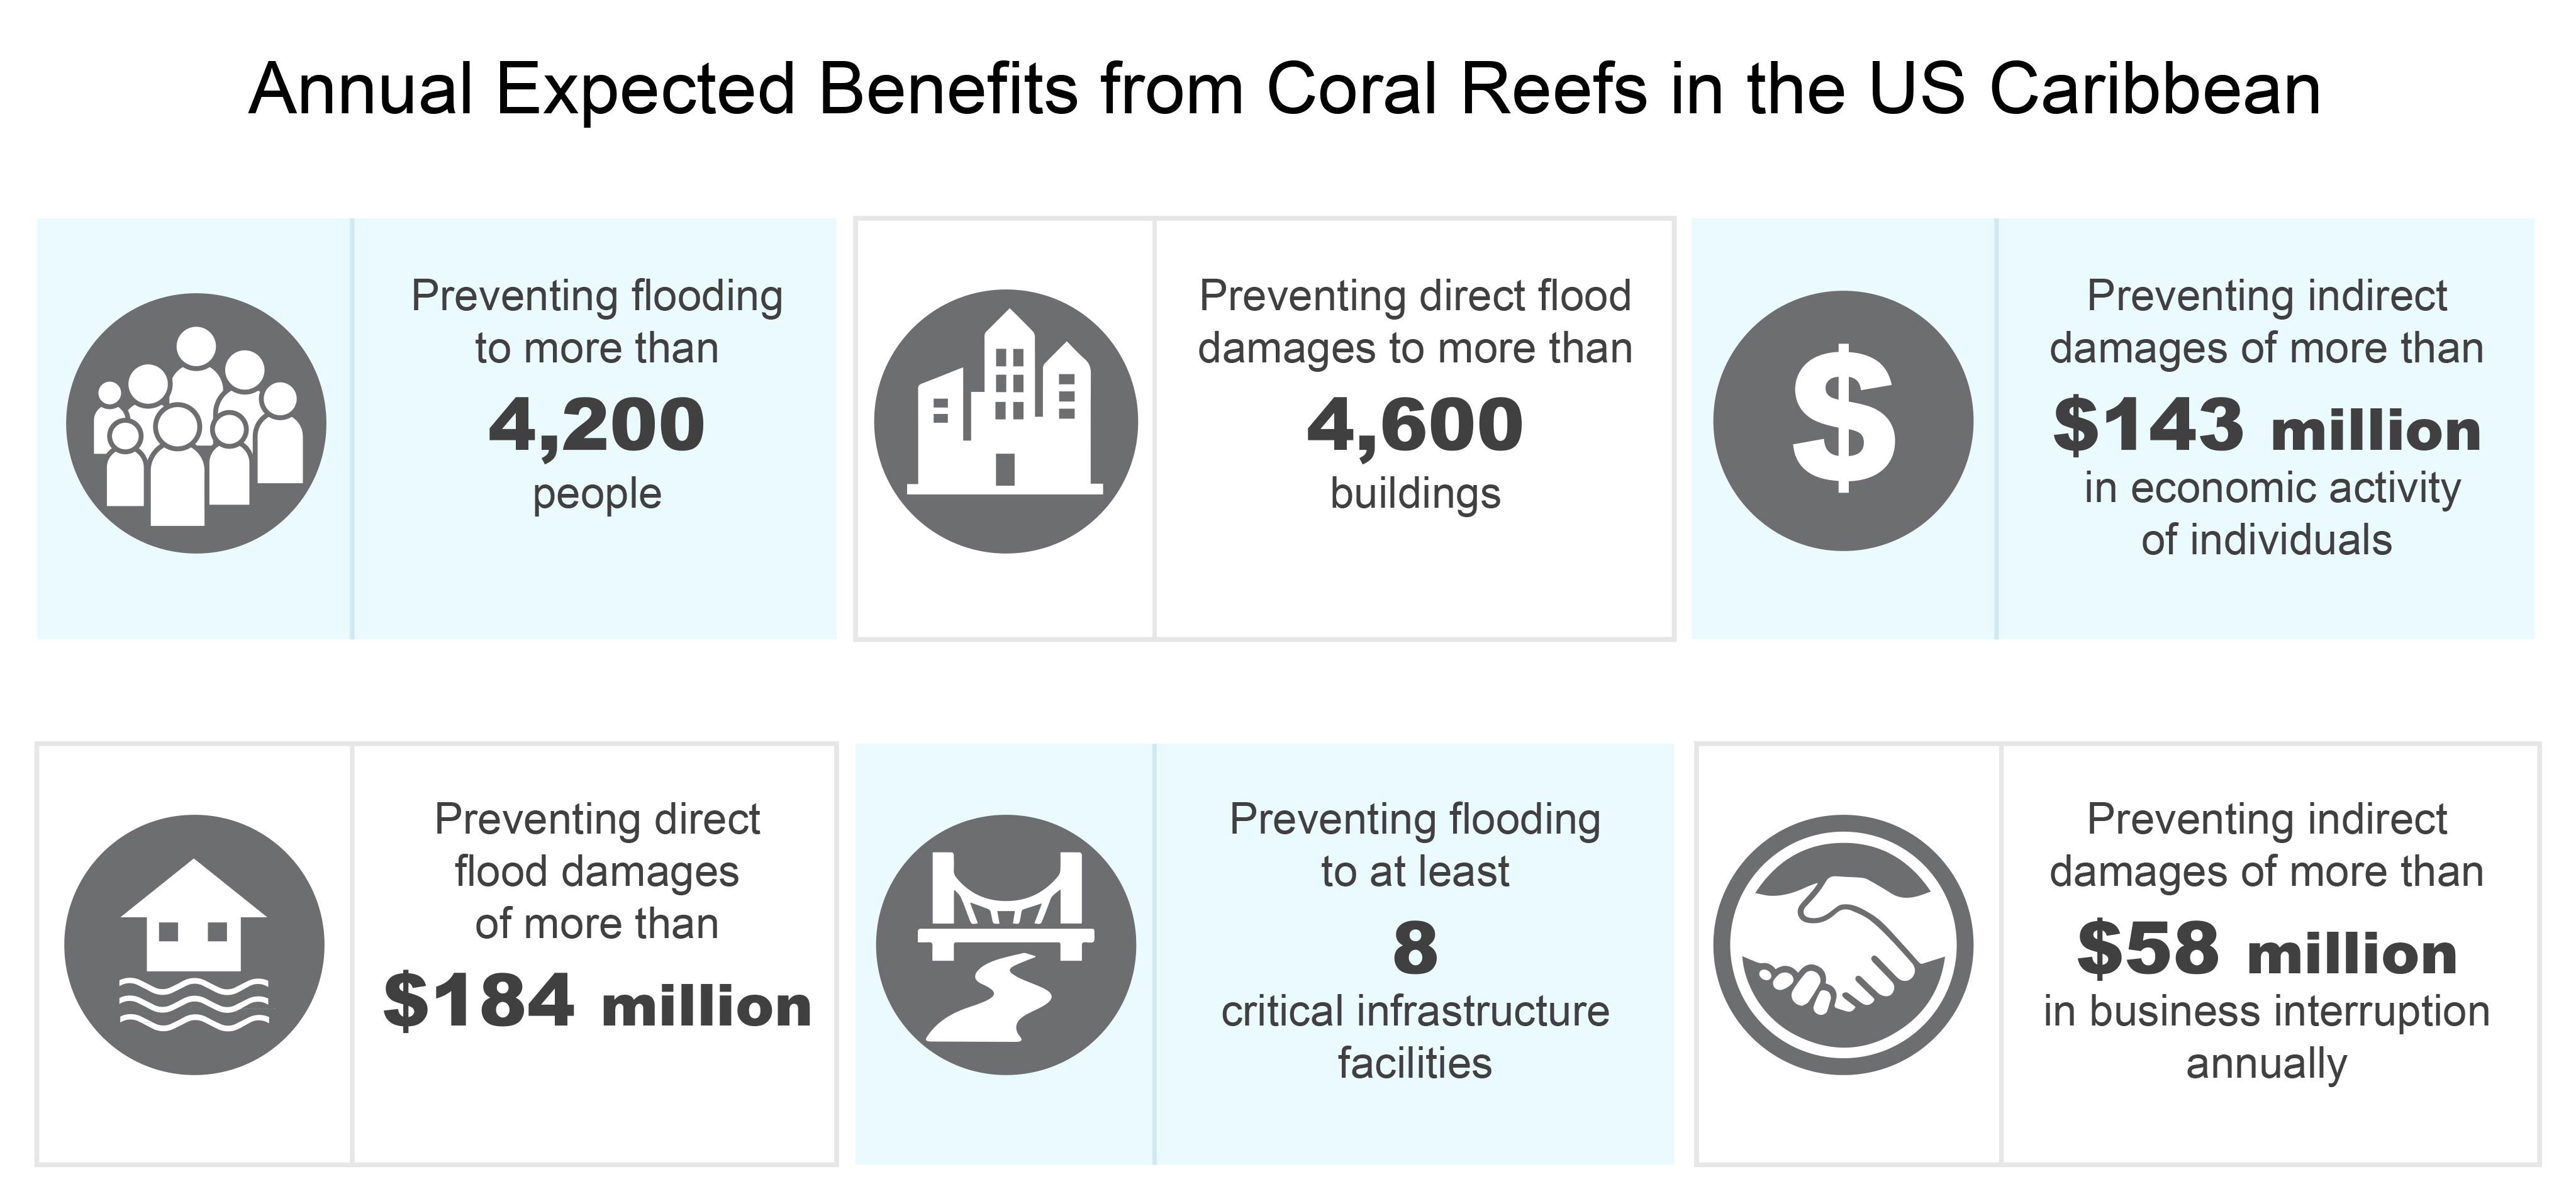 Annual Expected Benefits from Coral Reefs in the US Caribbean